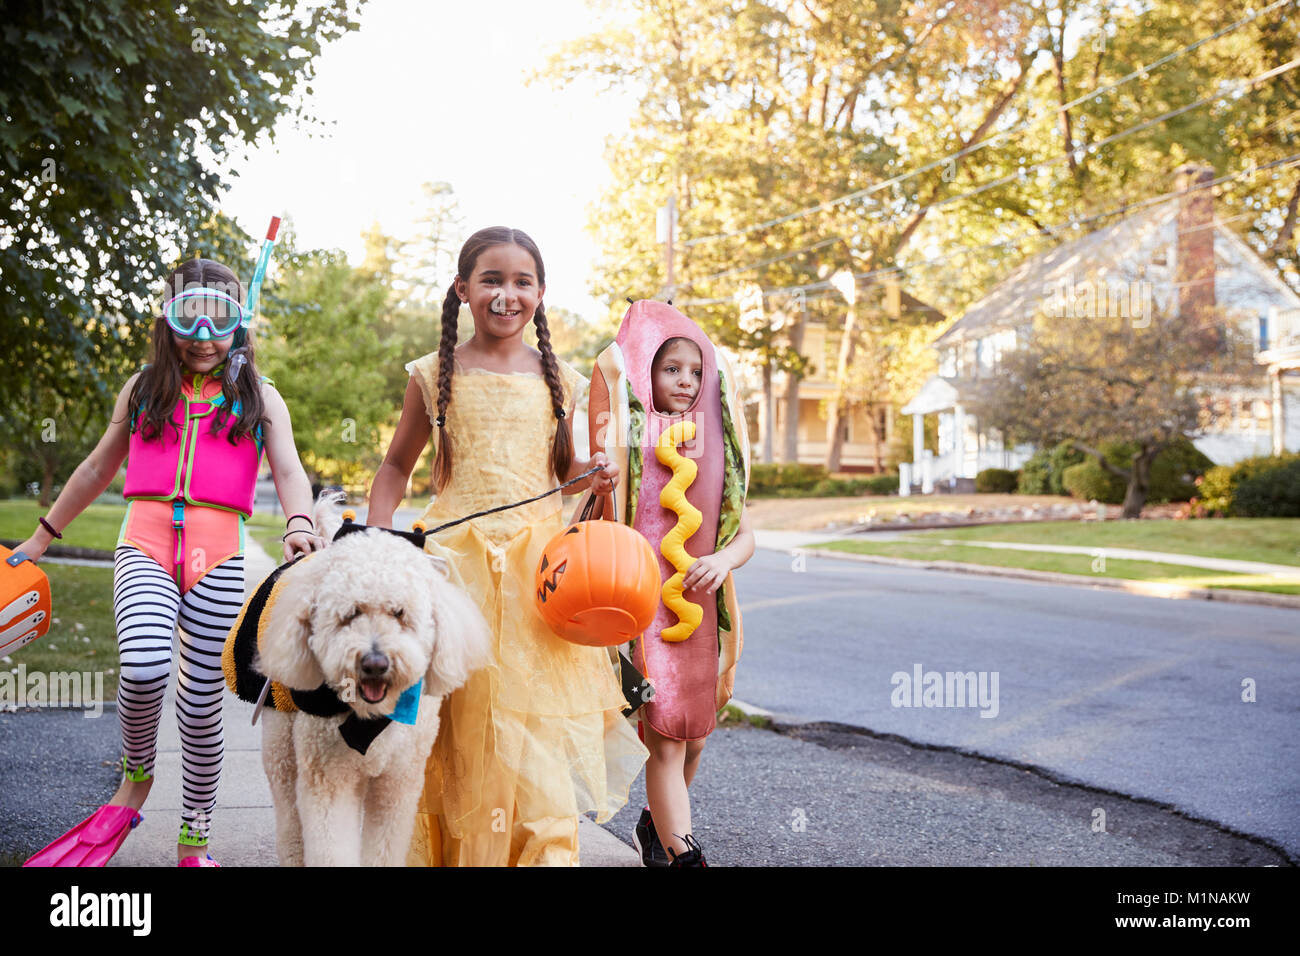 Children And Dog In Halloween Costumes For Trick Or Treating Stock Photo